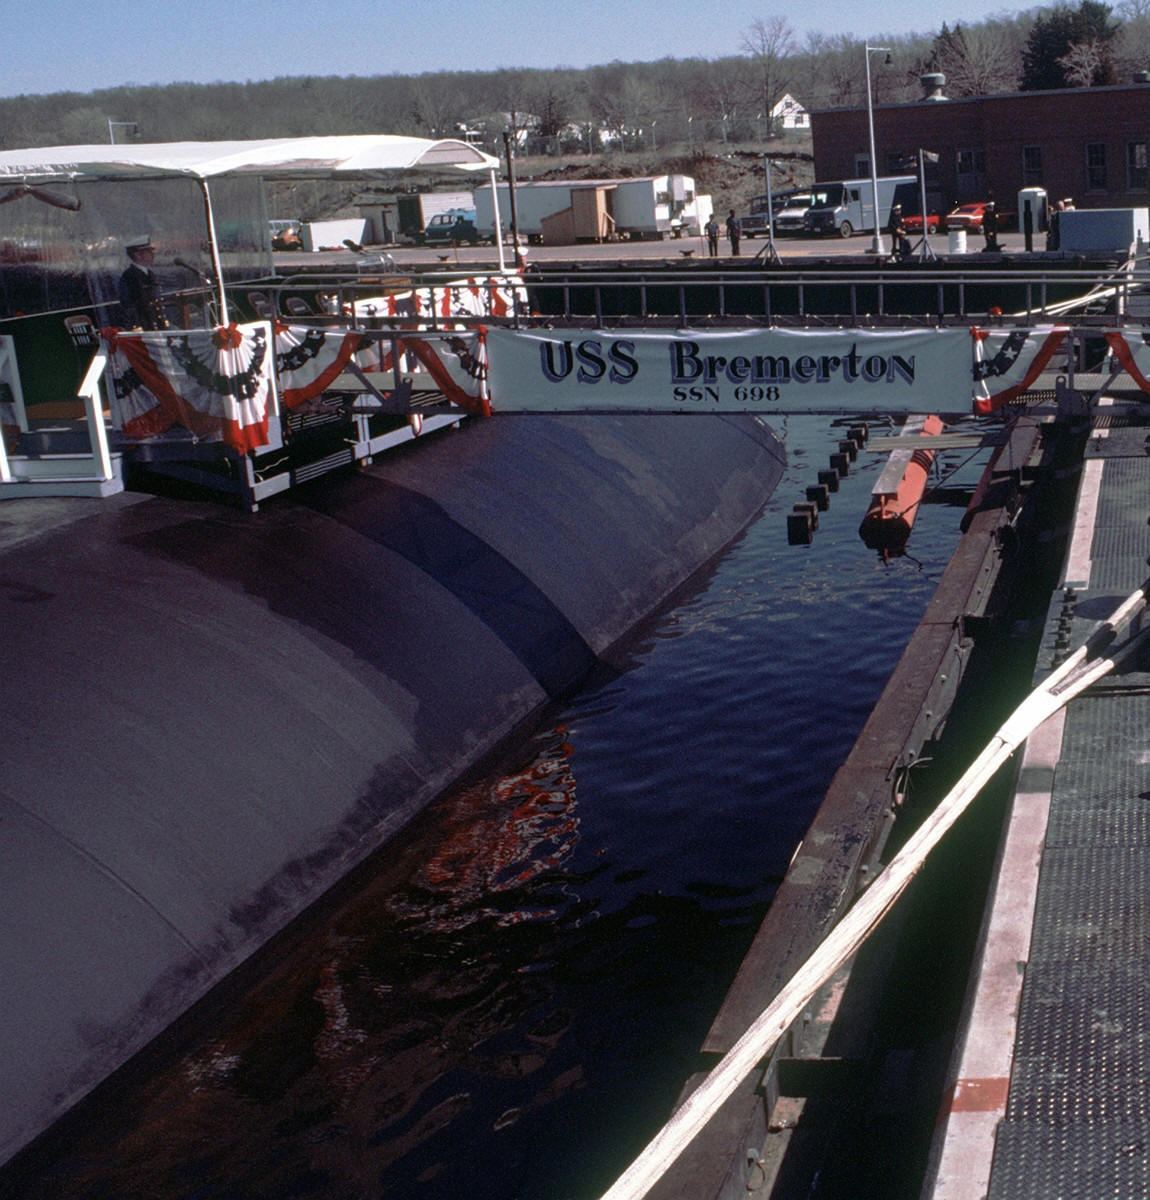 uss bremerton ssn-698 commissioning